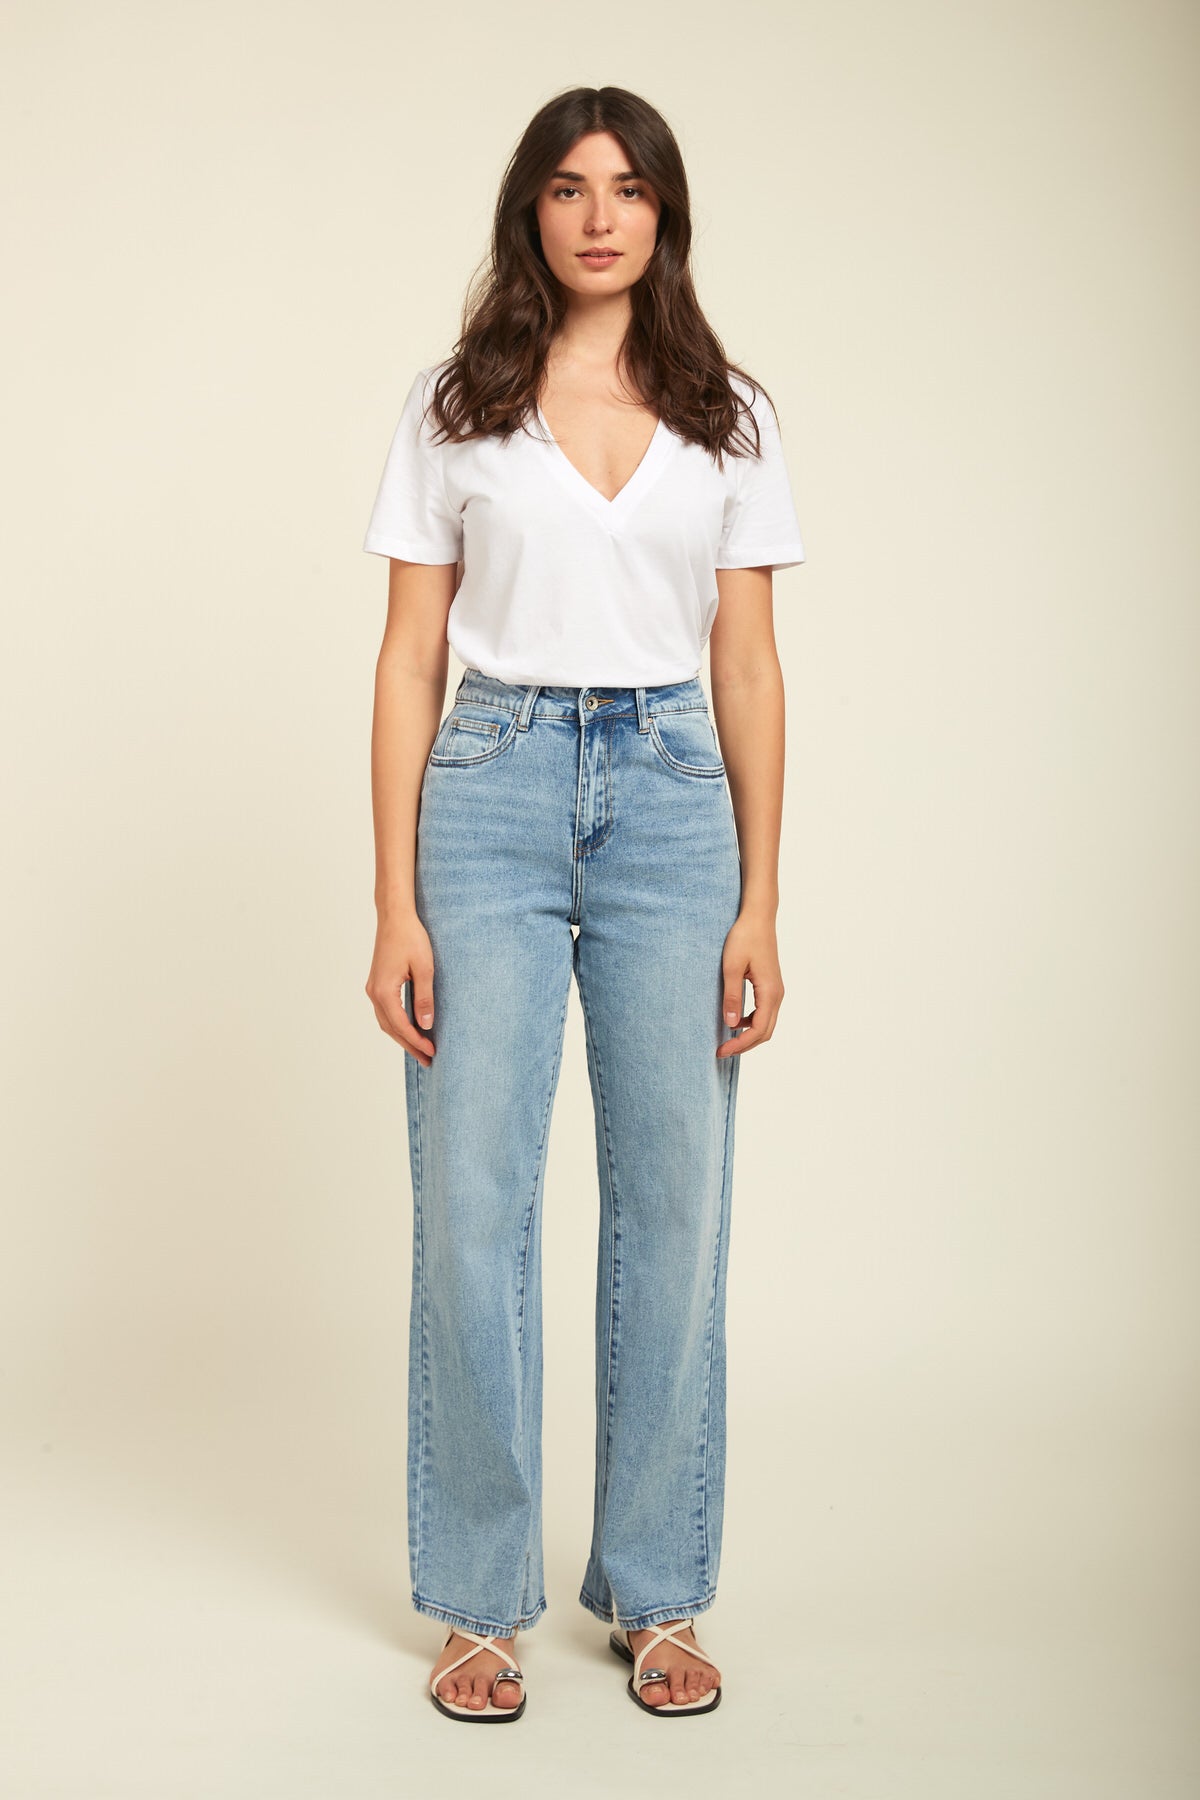 Large cut -off jeans - Perrine